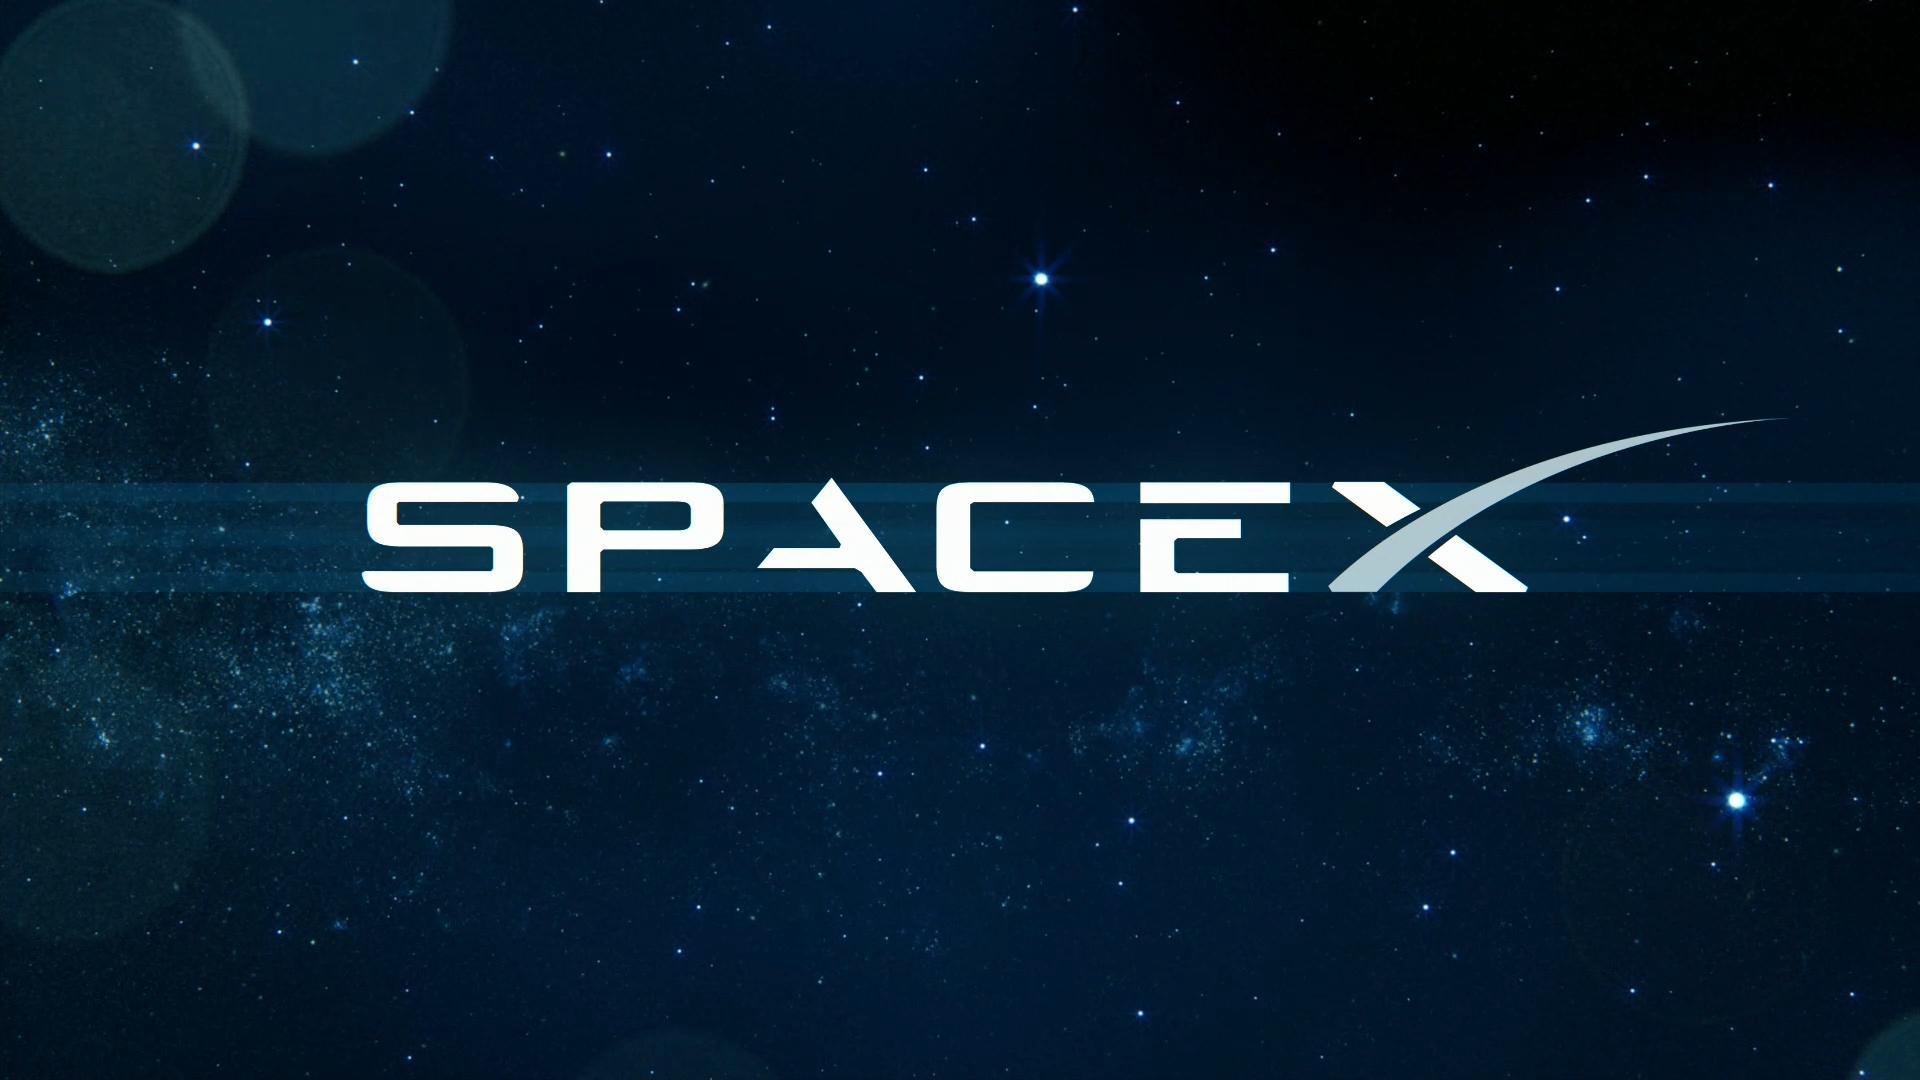 SpaceX HD Wallpapers  4K Backgrounds  Wallpapers Den